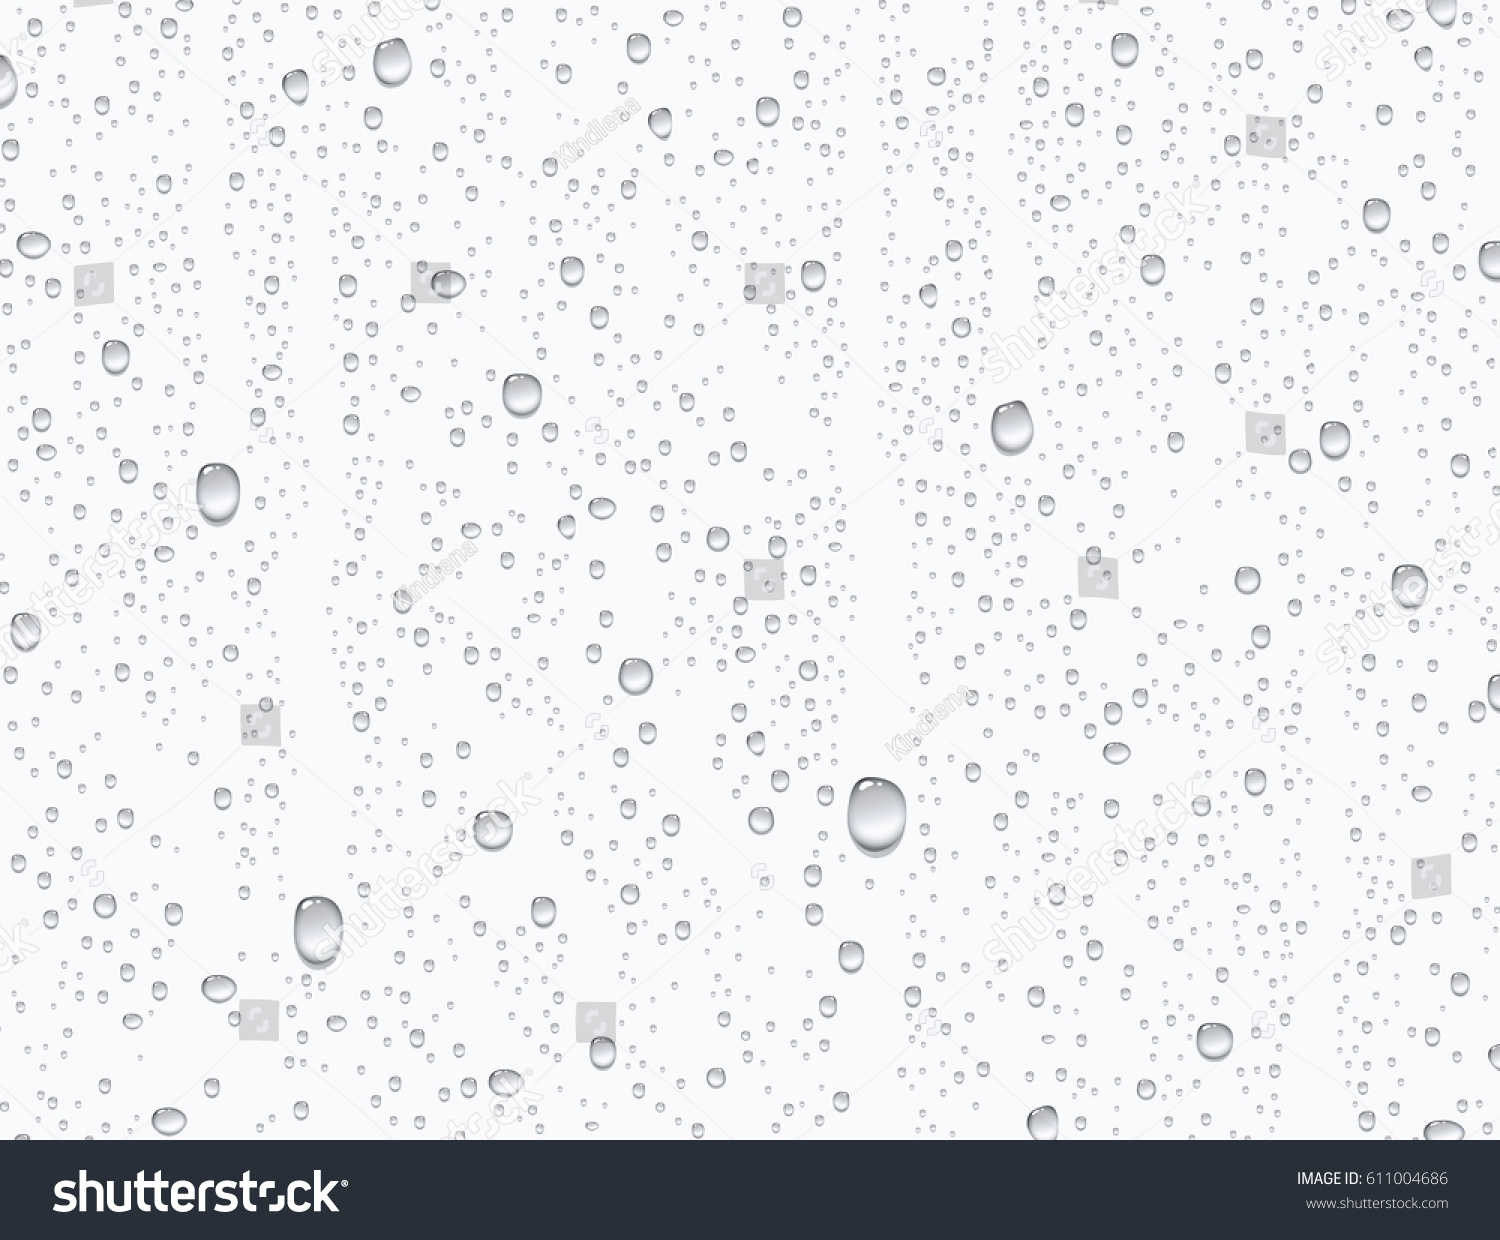 Water rain drops or steam shower isolated on white background. Realistic pure droplets condensed. Vector clear vapor bubbles on window glass surface for your design